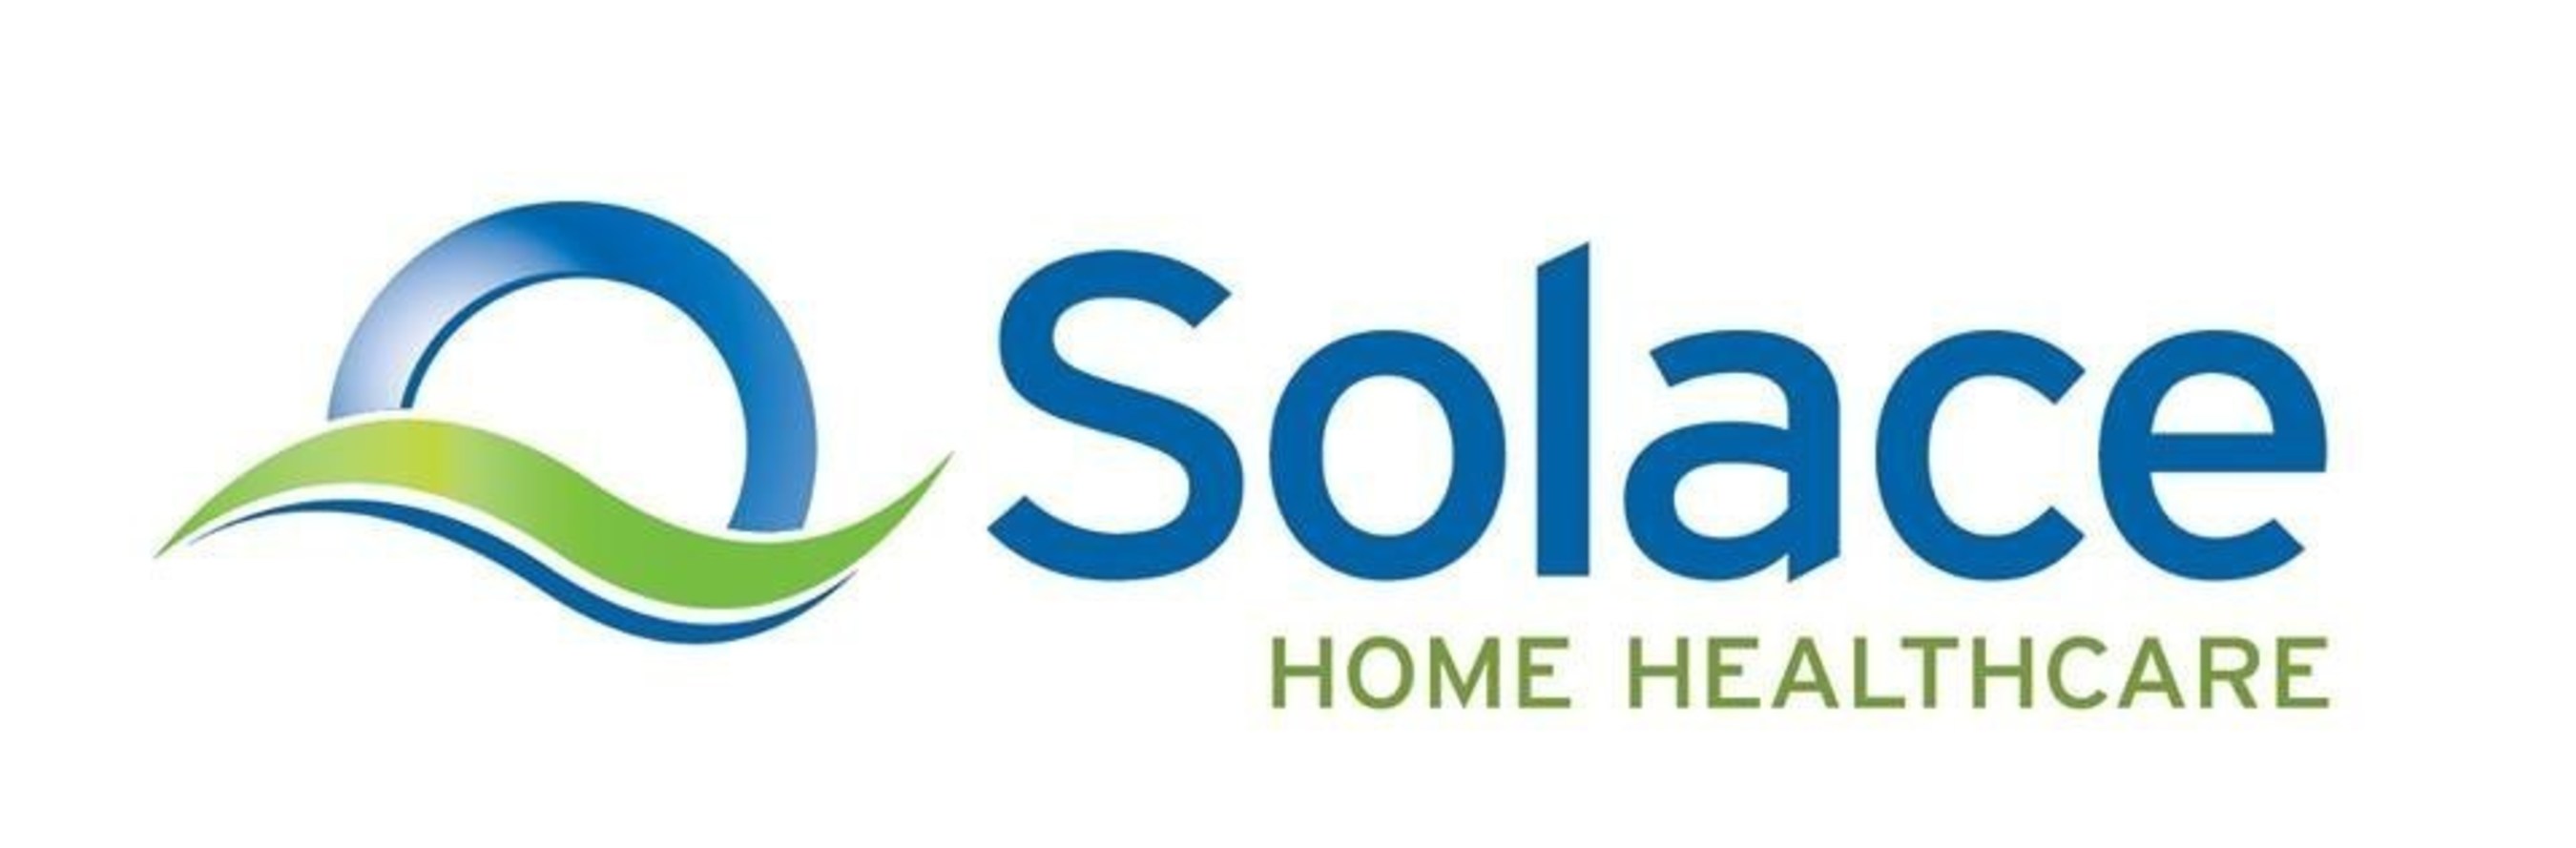 Solace Home Healthcare (www.solacehealthcare.com)